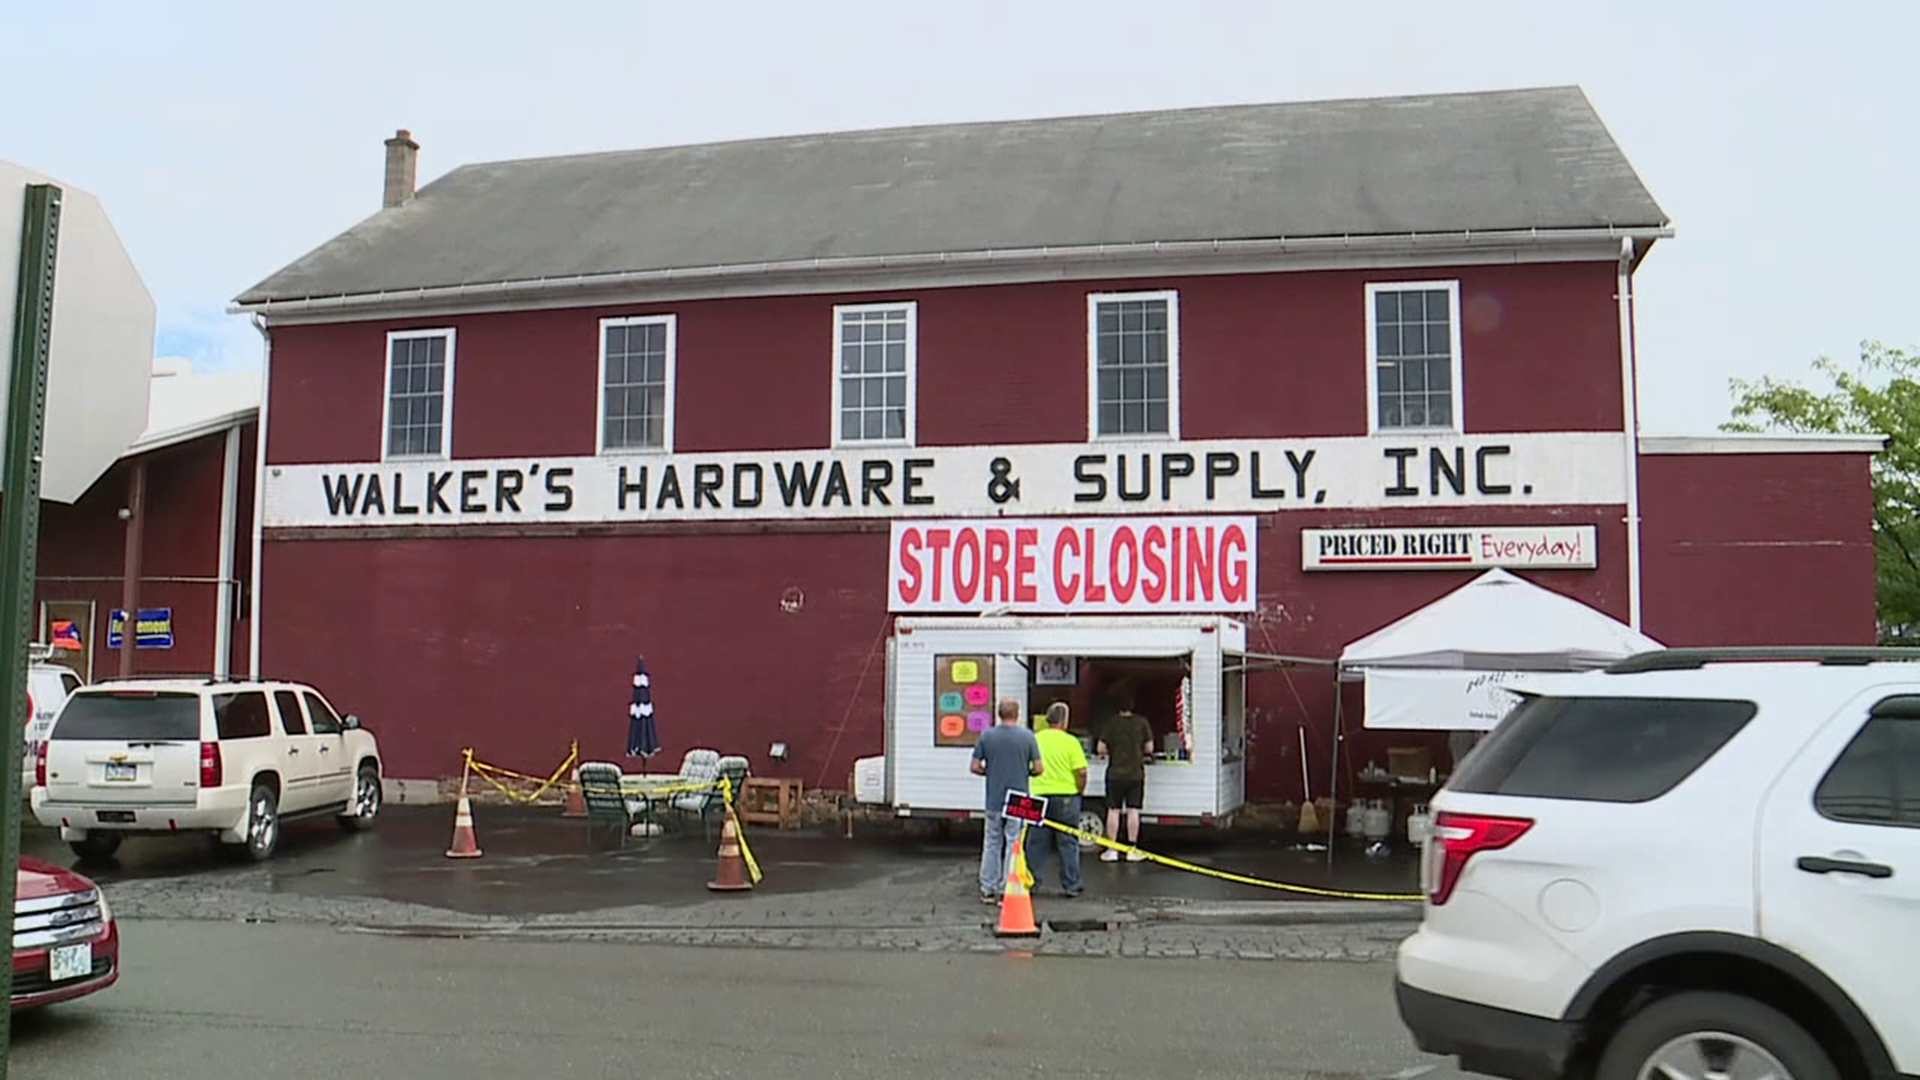 Walker's Hardware & Supply is having a liquidation sale because the family owners are closing the business.